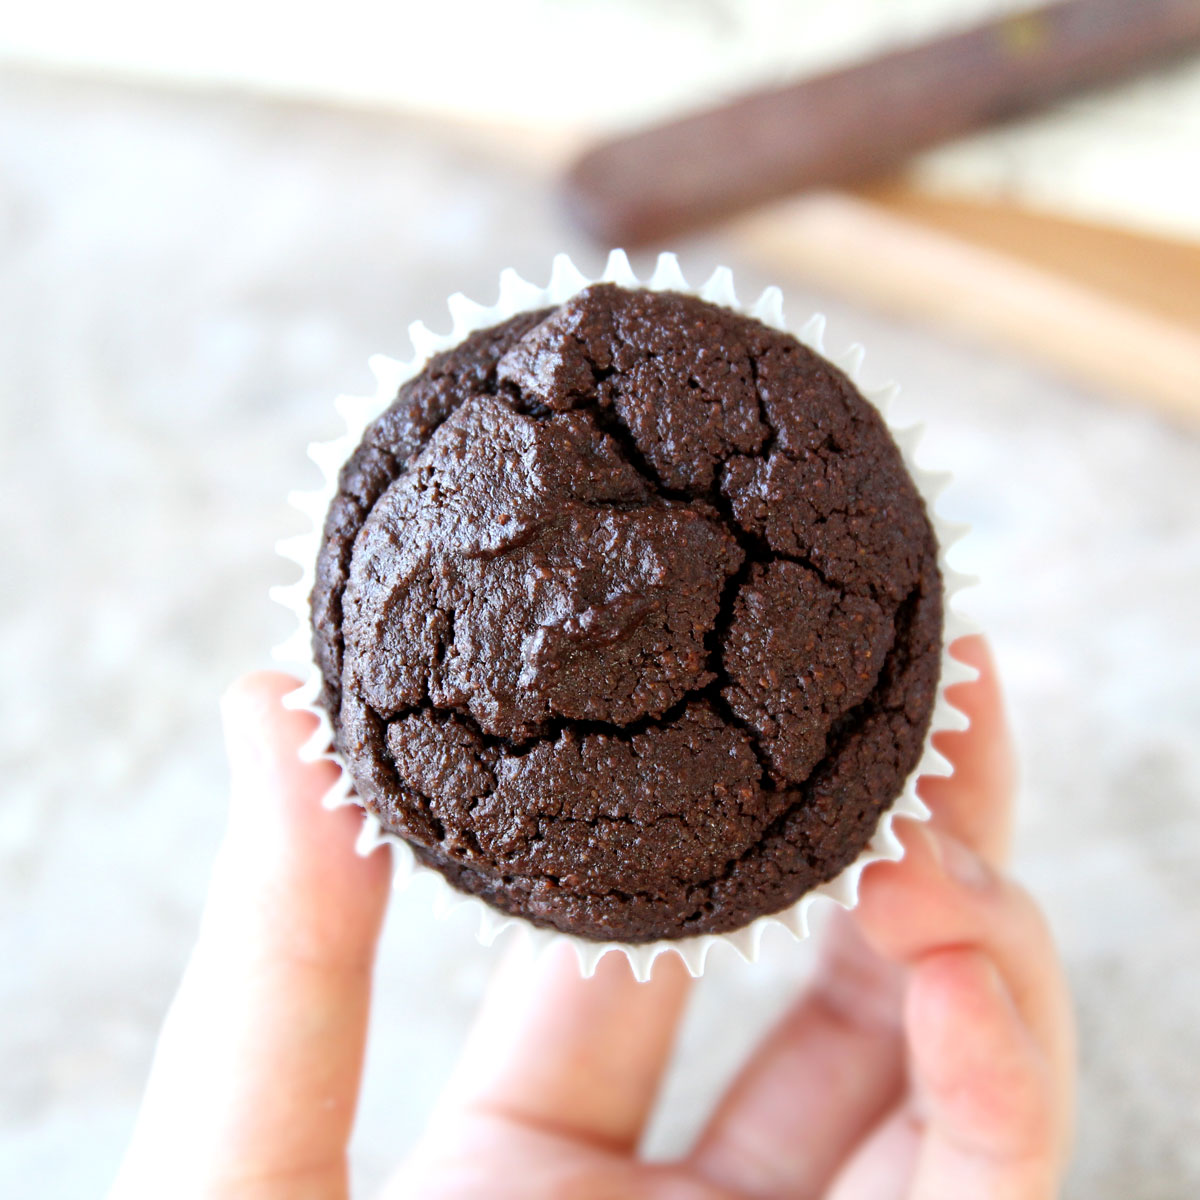 Paleo Cauliflower Chocolate Muffins Made in the Food Processor - Sweet Potatoes in the Microwave